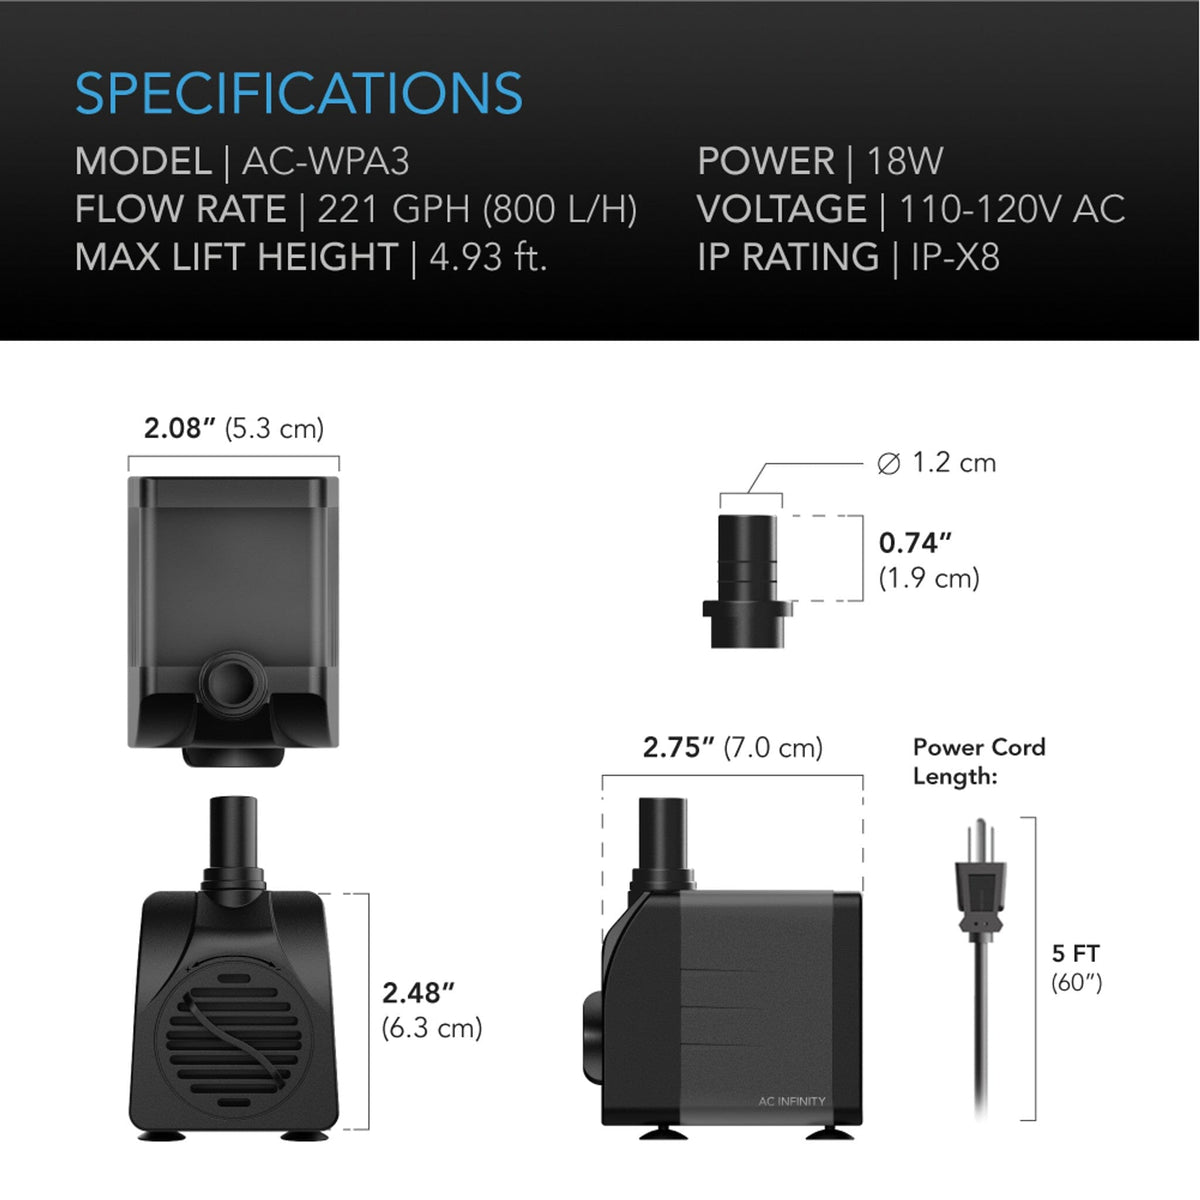 Water pump 18 w specifications